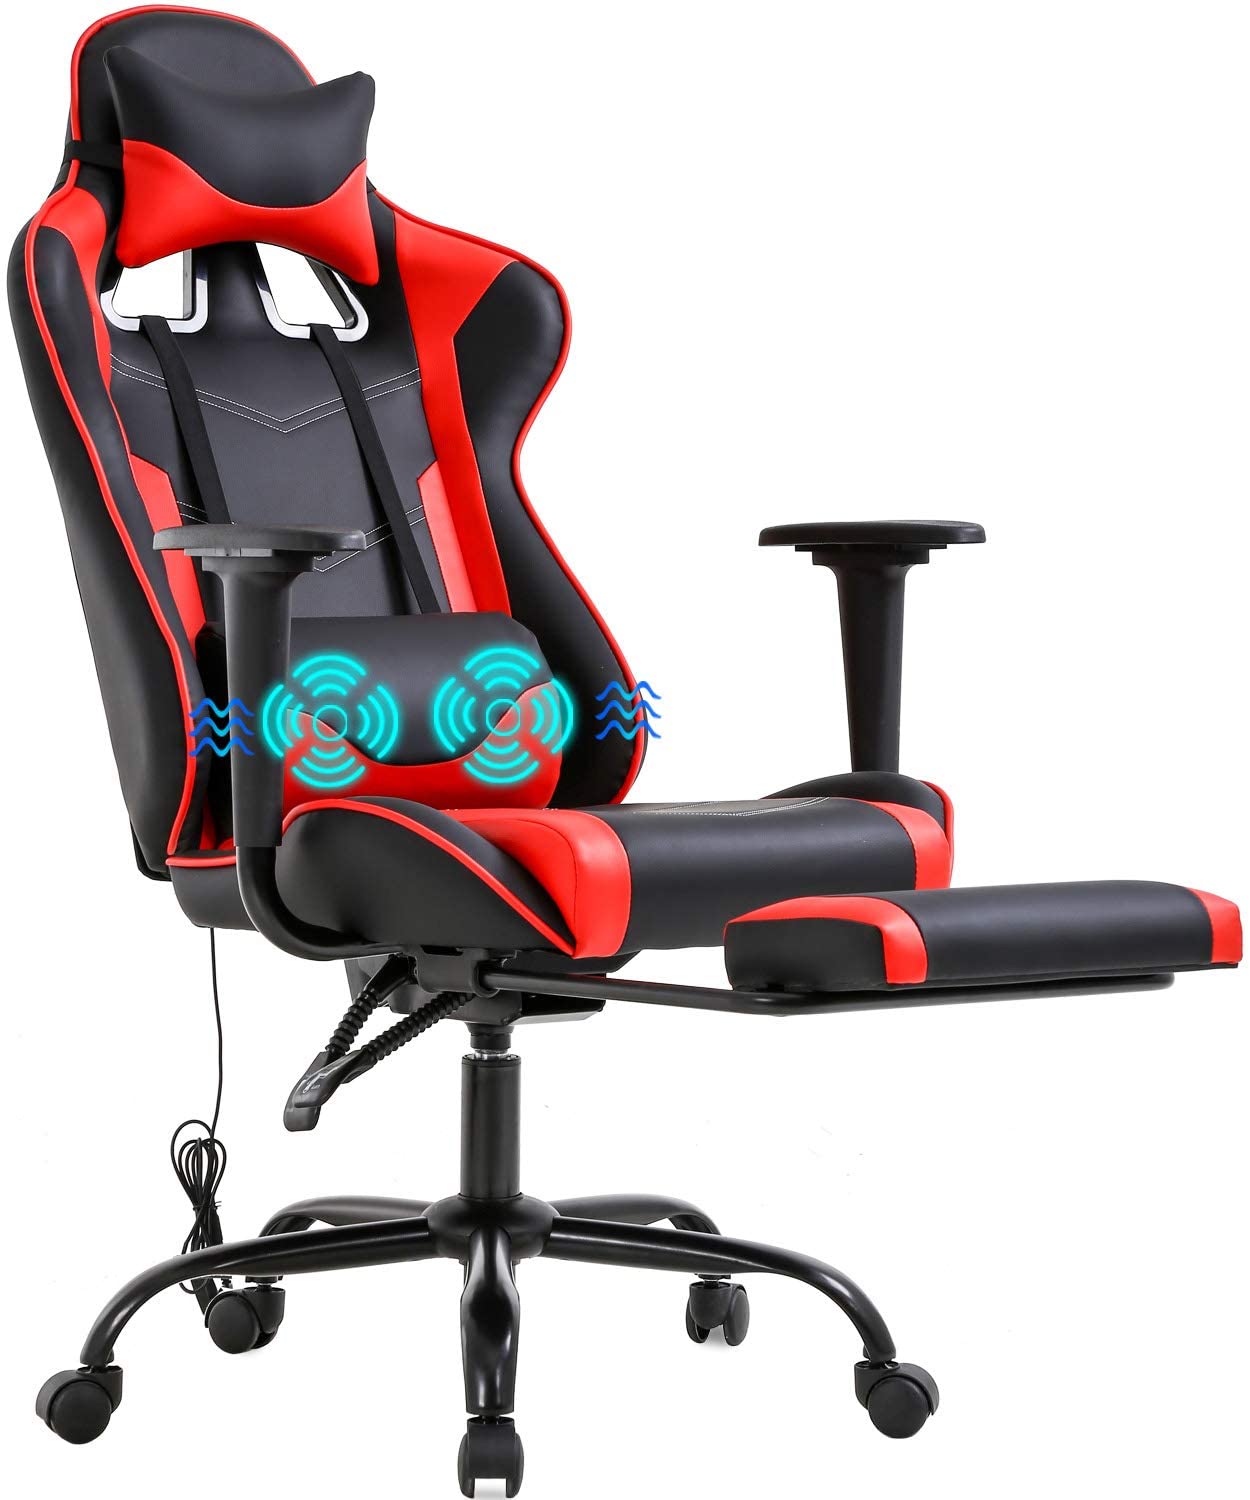 <strong>2. Gaming Chair Racing Office Chair</strong>